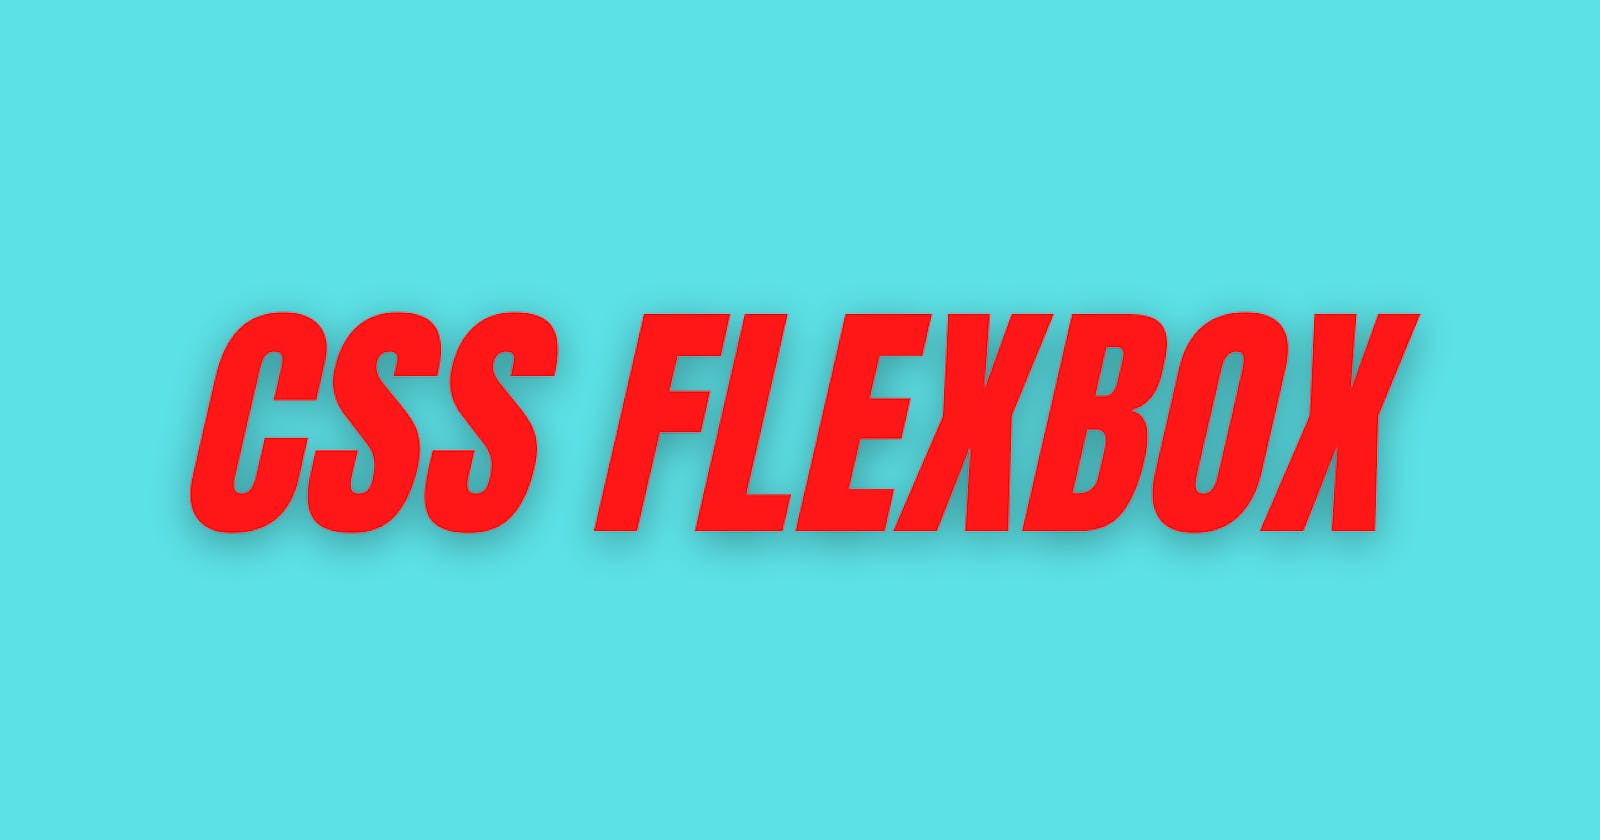 A Complete Guide To CSS Flexbox